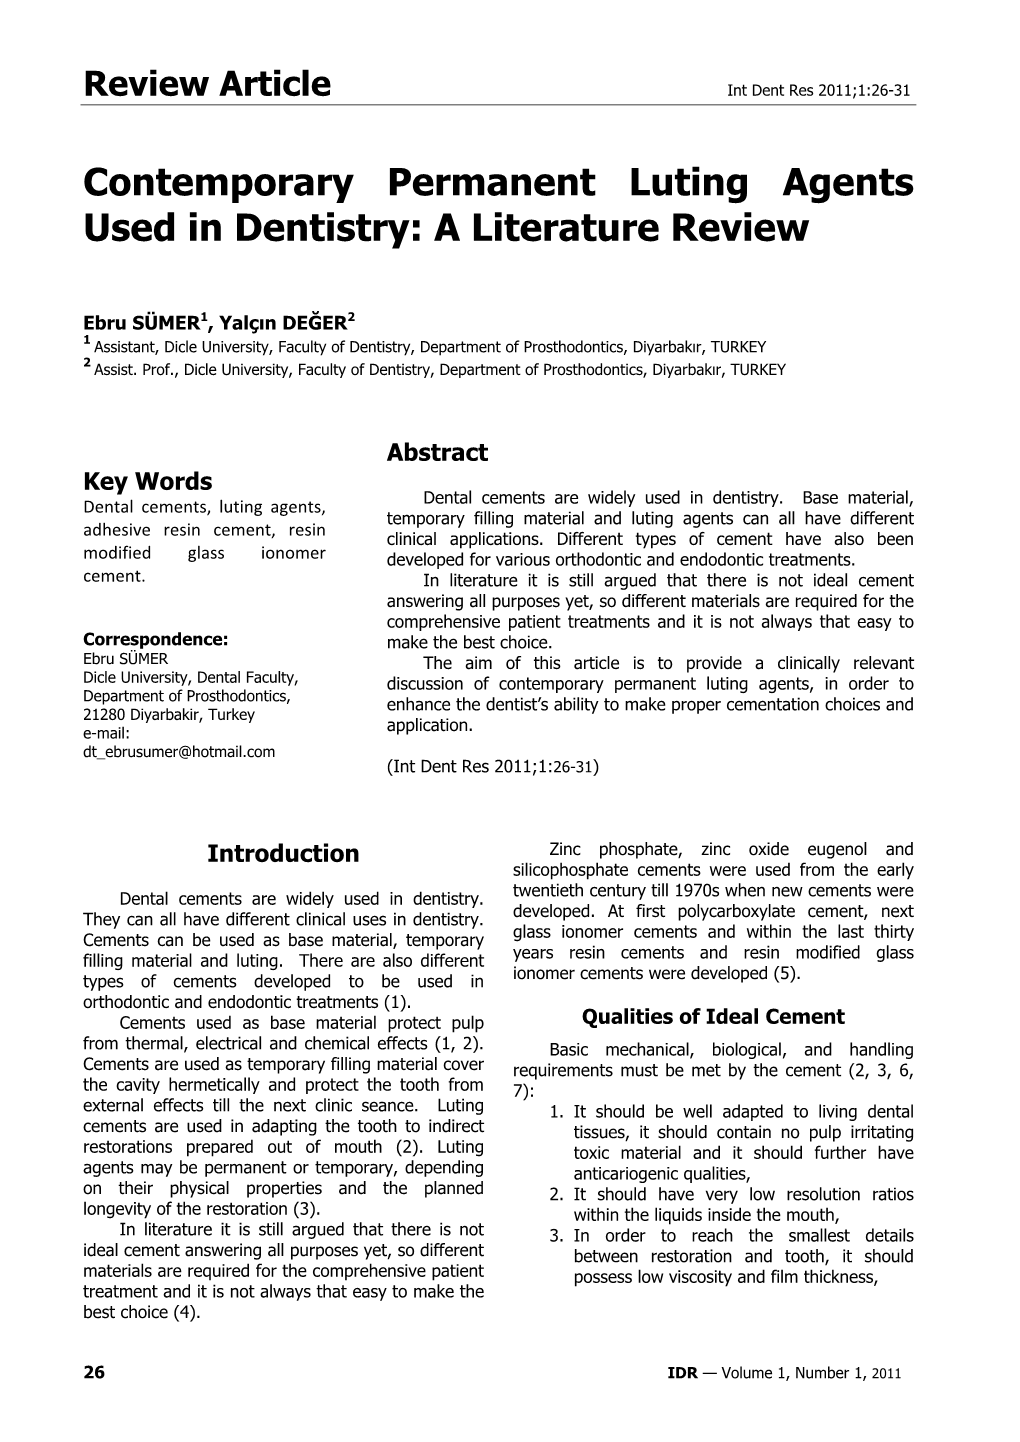 Contemporary Permanent Luting Agents Used in Dentistry: a Literature Review